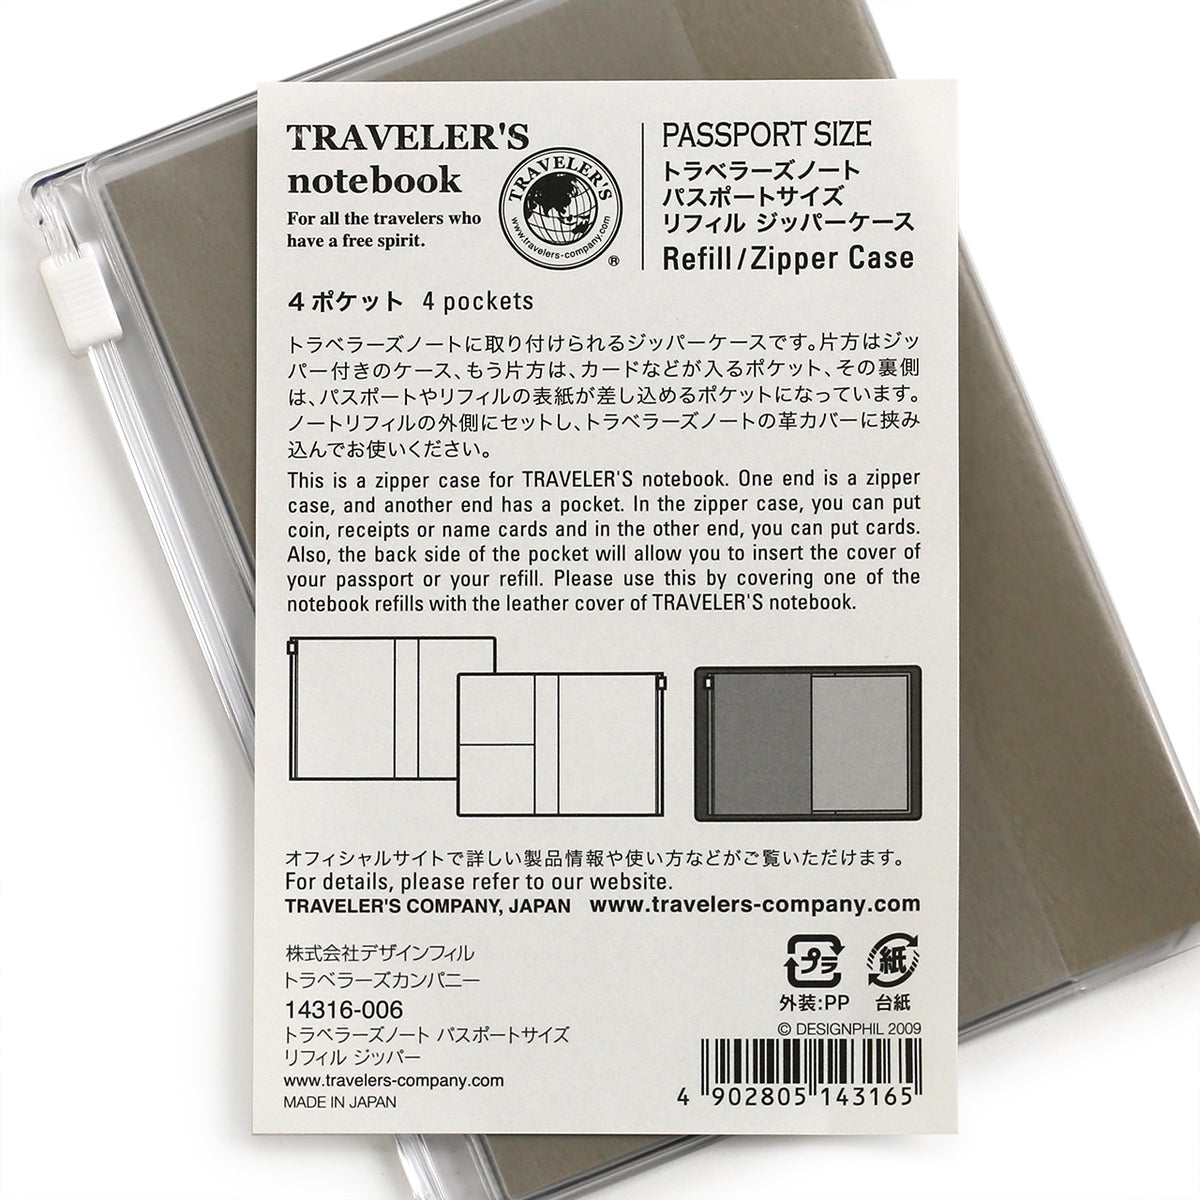 information sheet on passport sized zipper case with 4 pockets